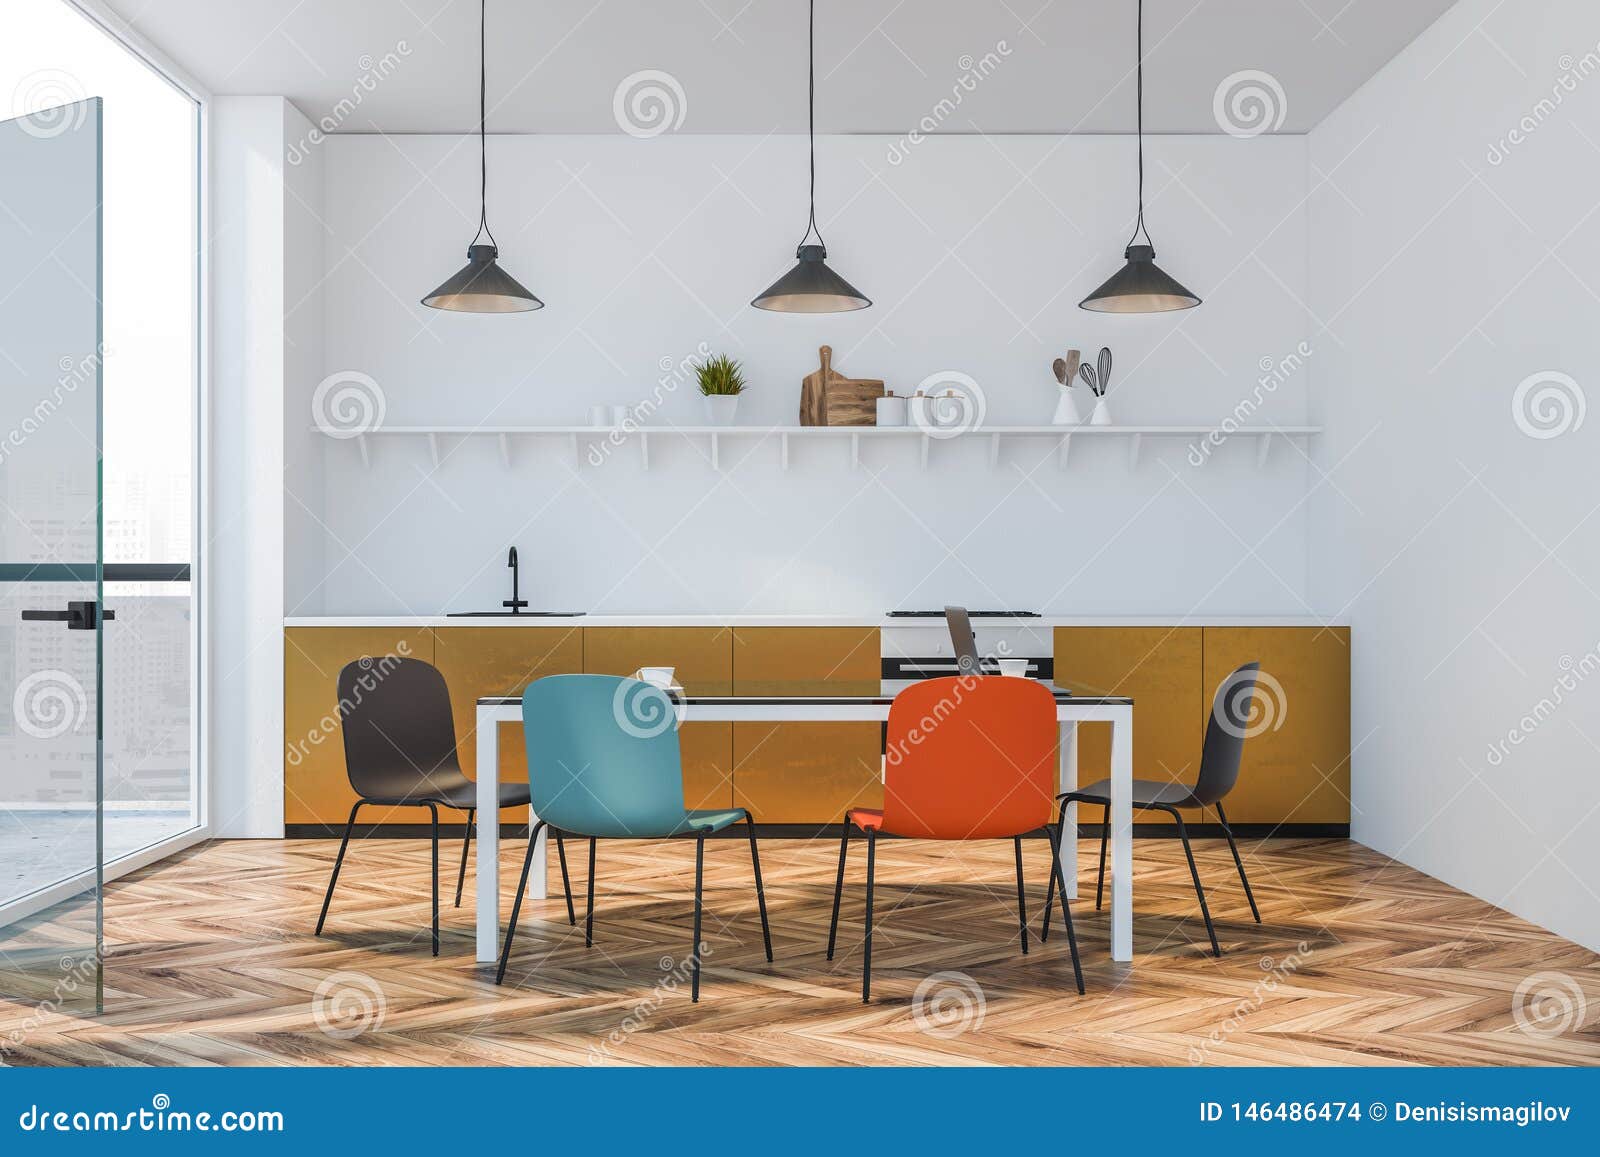 Beige Countertop Kitchen With Colored Chairs Stock Illustration